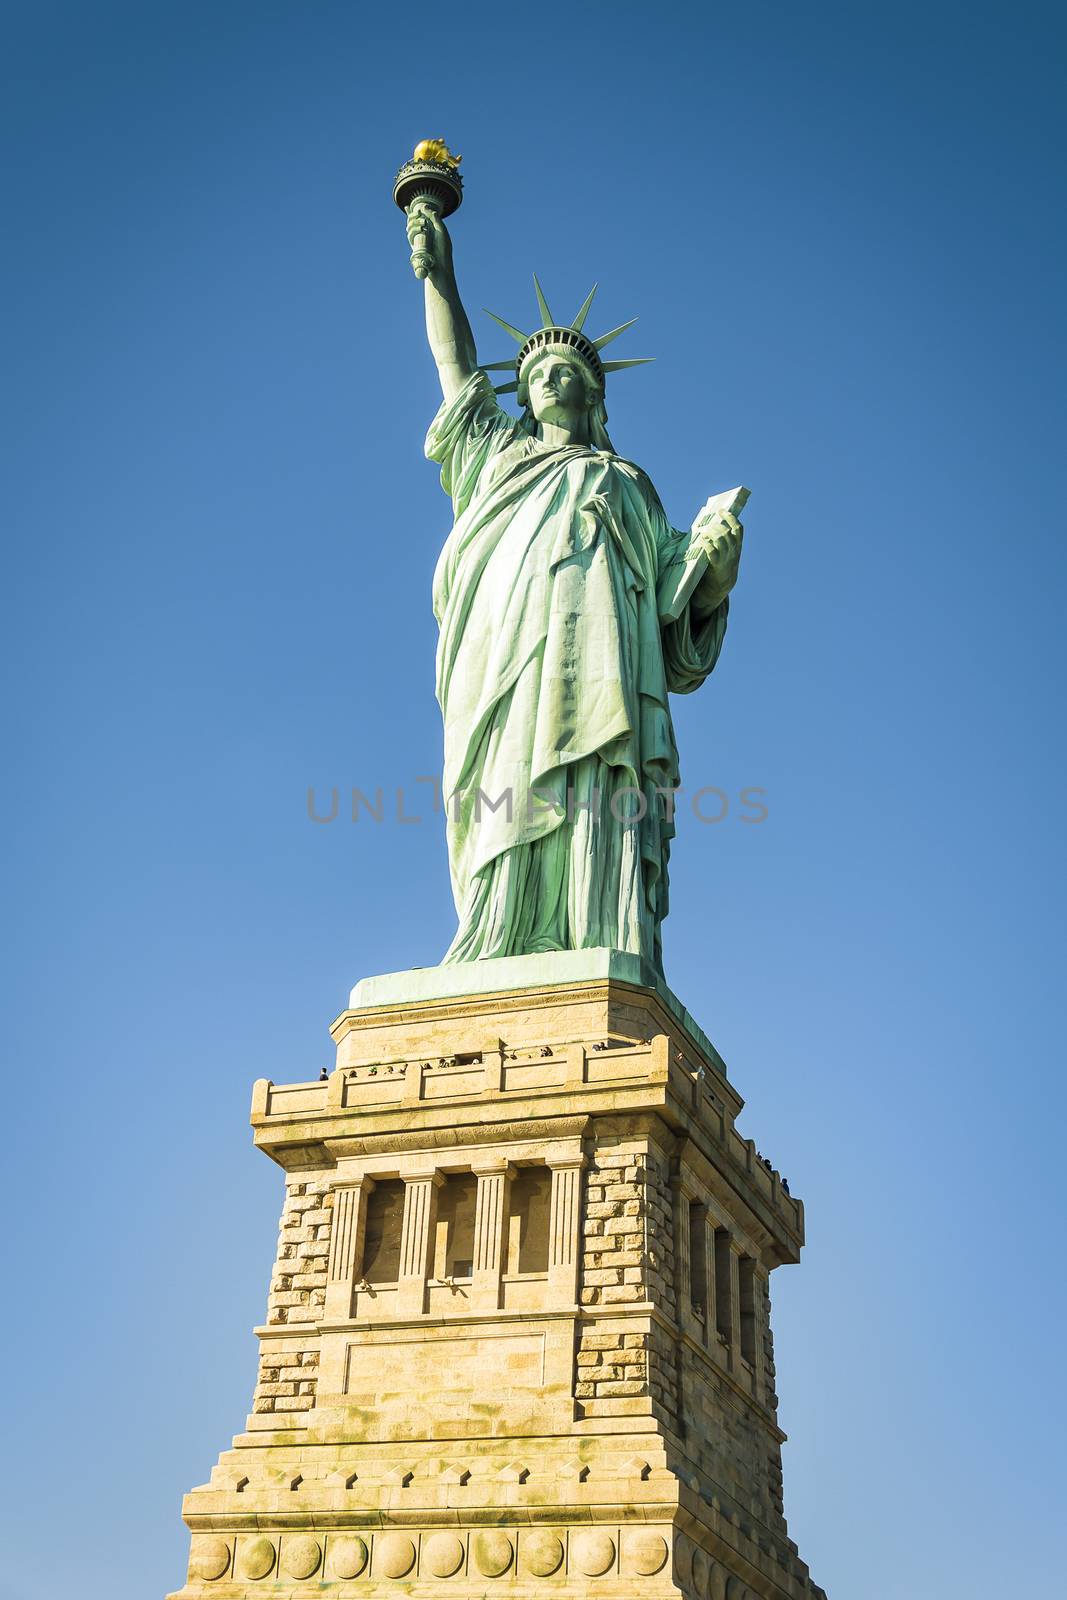 Bottom view of the famous Statue of Liberty by rarrarorro